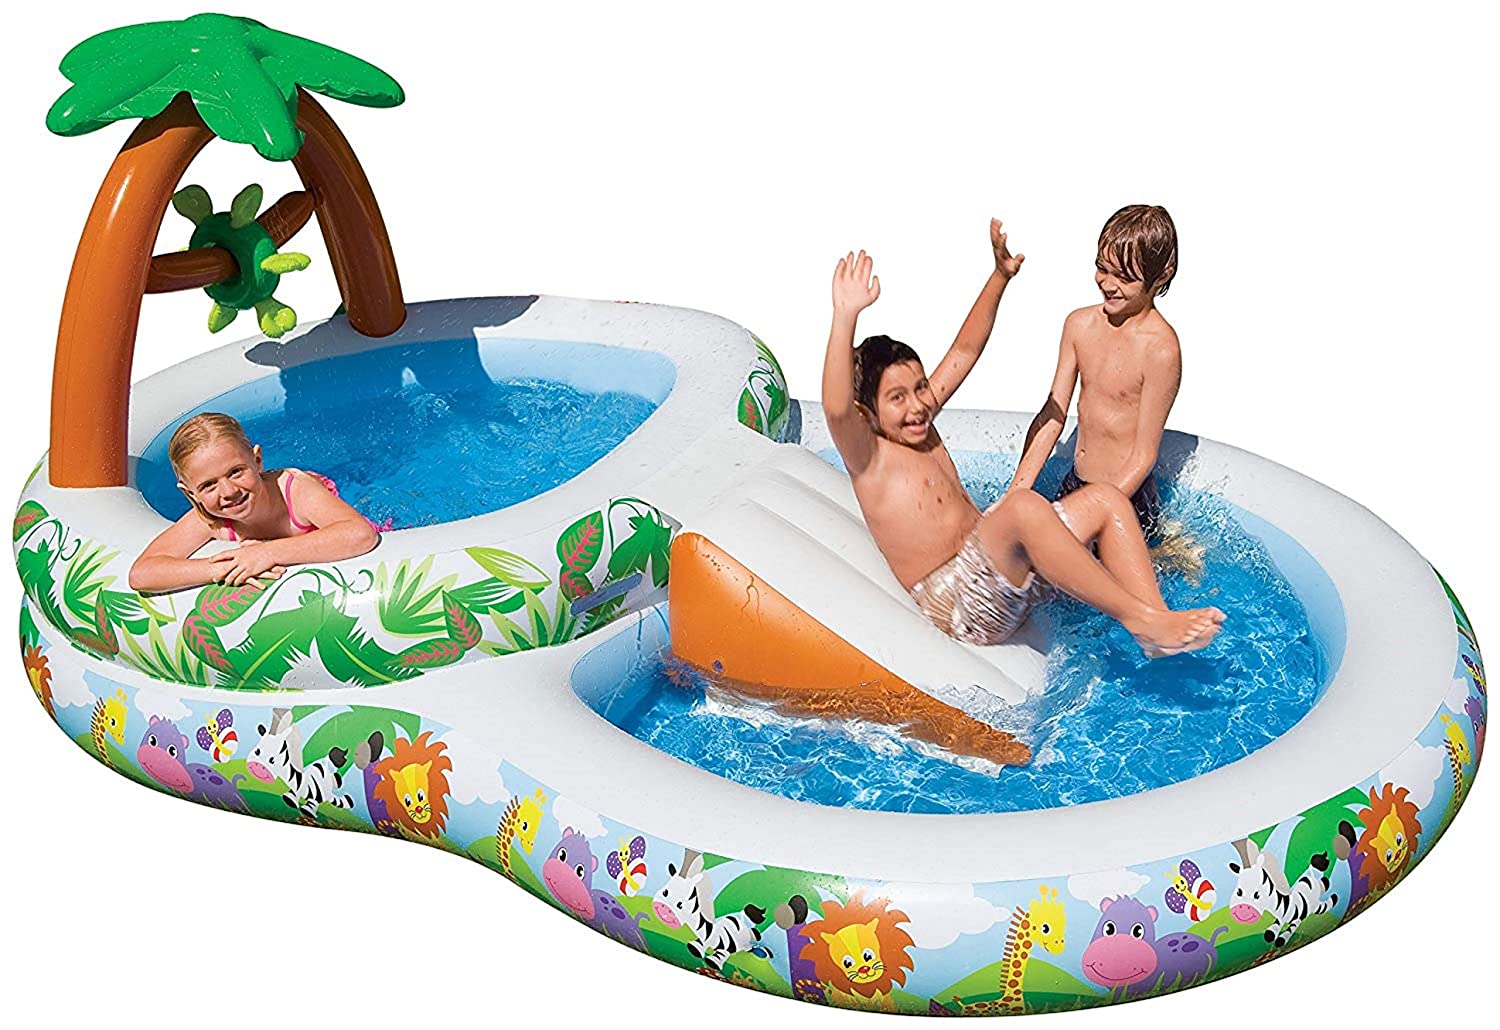 Kids Inflatable Pool. Small Kiddie Blow Up Above Ground Swimming Pool Is Great For Kids & Children To Have Outdoor Water Fun With Slide, Floats & Toys. This Dinoland Baby Swim Pool - Light & Portable.